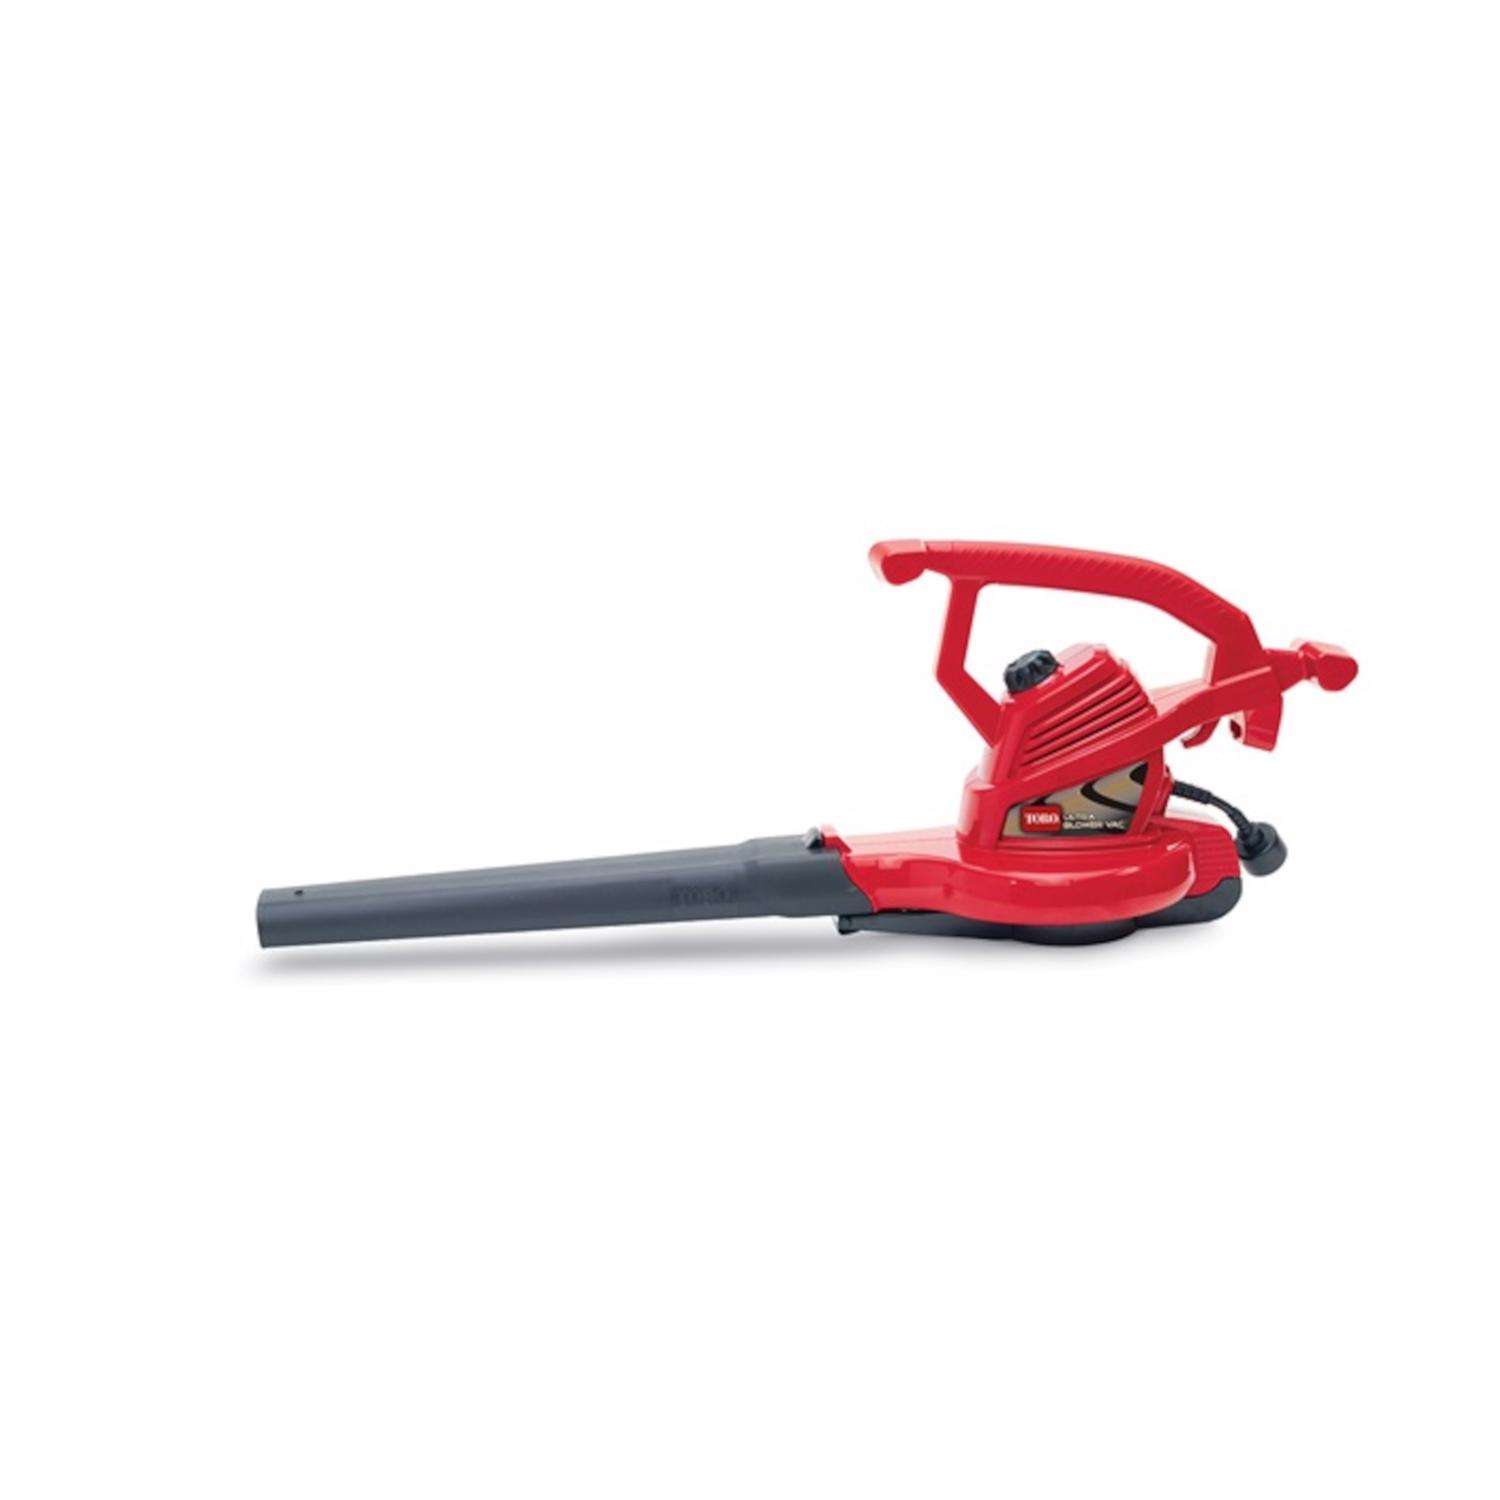 EZ Travel Hand Held Electric Blower and Air Vacuum Tool (Assorted Colors)  Mini Blower Leaf Blower and Vacuum Combo